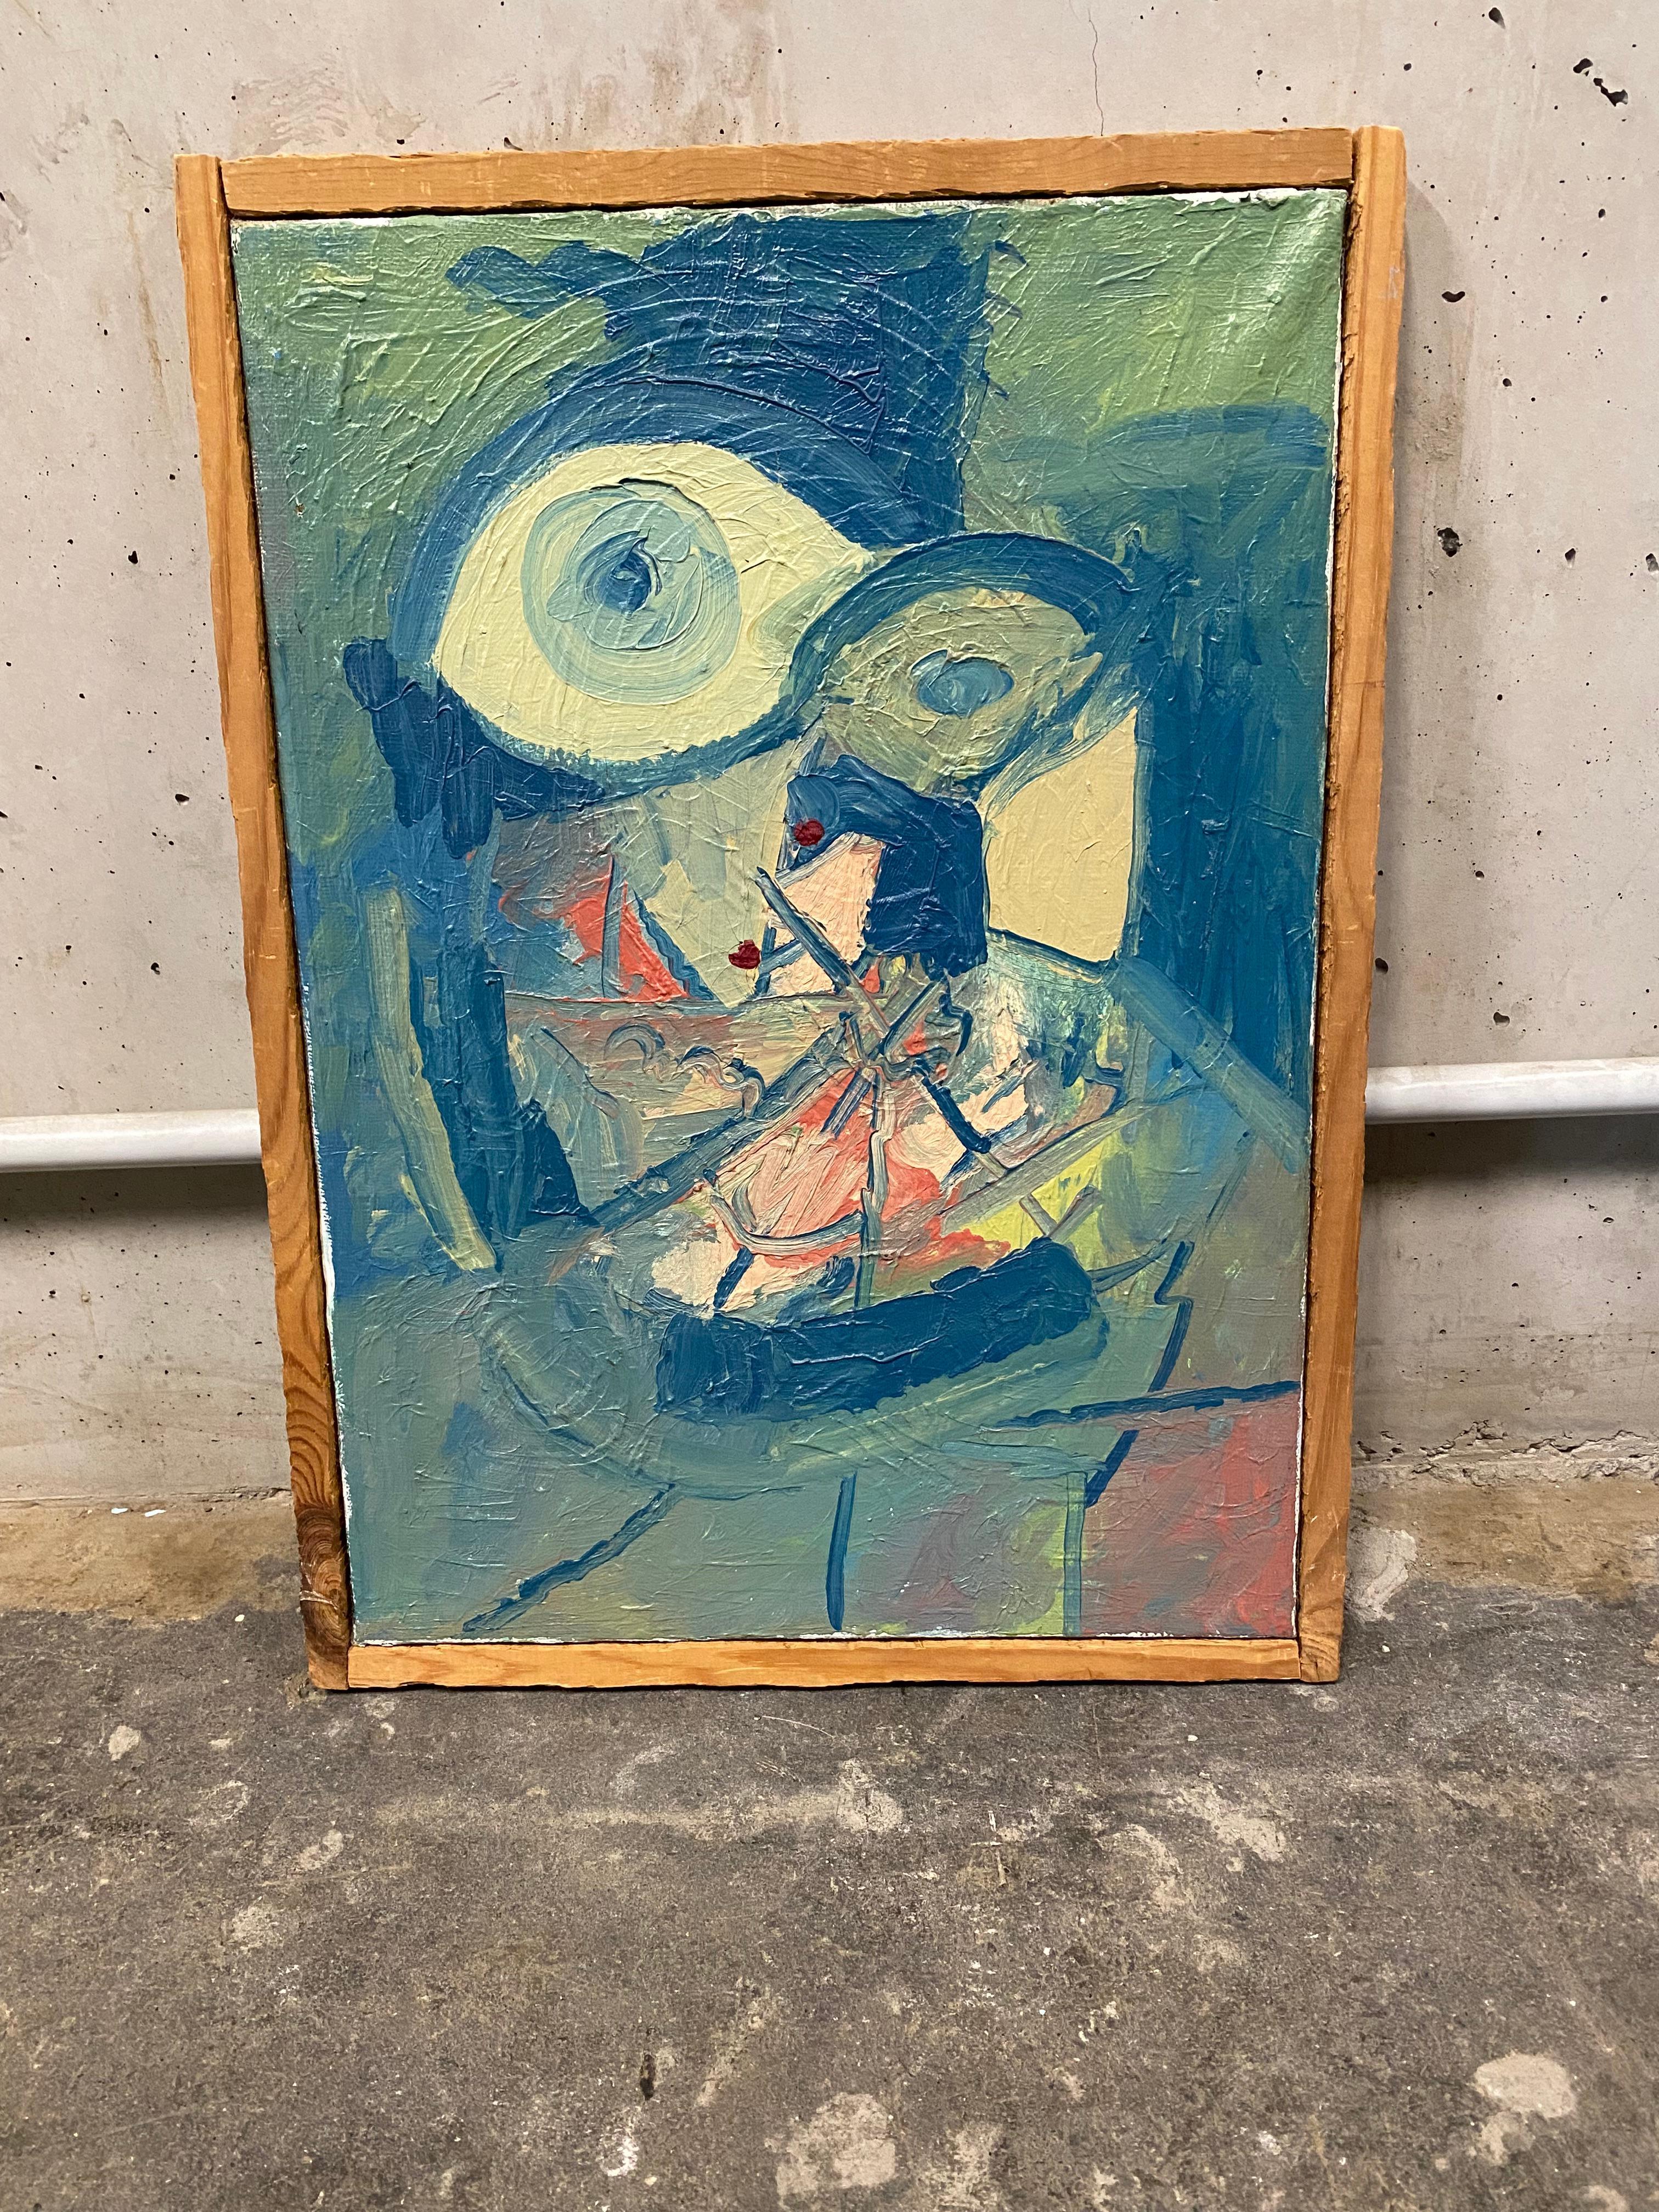 Unfortunately, this abstract oil painting is not attributed to any artist. It is painted on canvas and probably aged in the 1950s. The simple frame dates from the same period. The piece was acquired in Denmark, which means that it could be a Danish